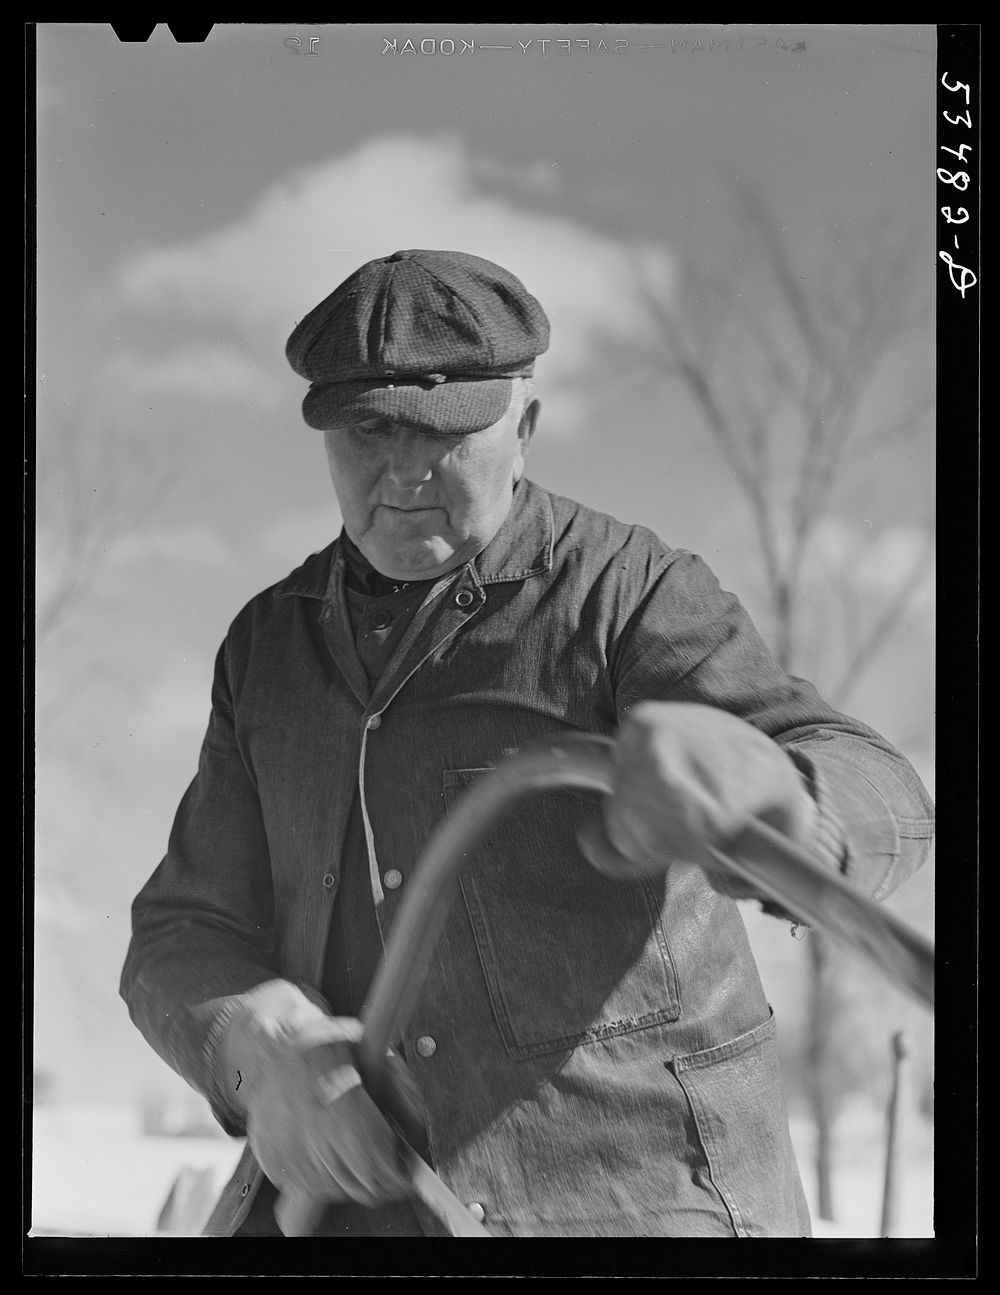 [Untitled photo, possibly related to: Farmer sawing wood for winter fuel. Near Littleton, New Hampshire]. Sourced from the…